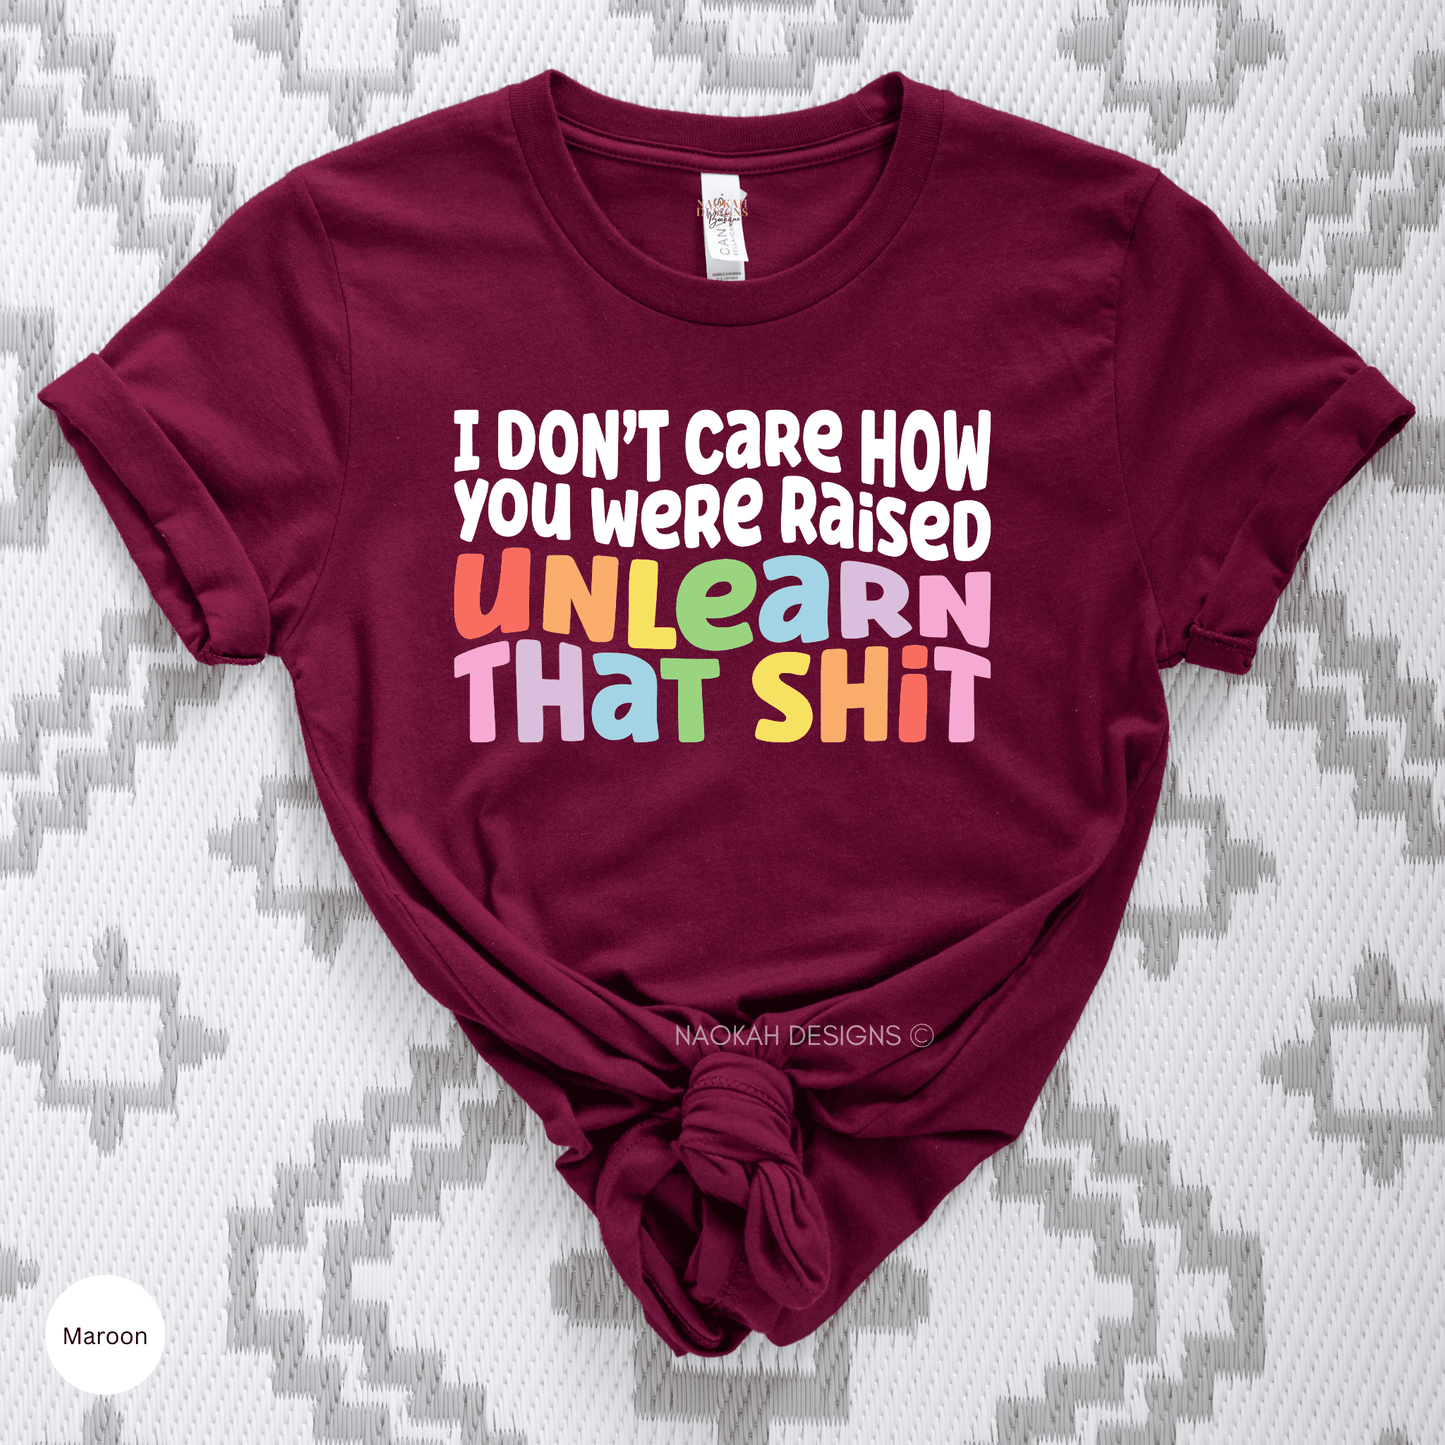 i don't care how you were raised unlearn that shit shirt, human rights, pride shirt, trans pride, equal rights, rainbow pride shirt, indigenous heritage month, indigenous history month, indigenous owned shop, indigenous peoples day shirt